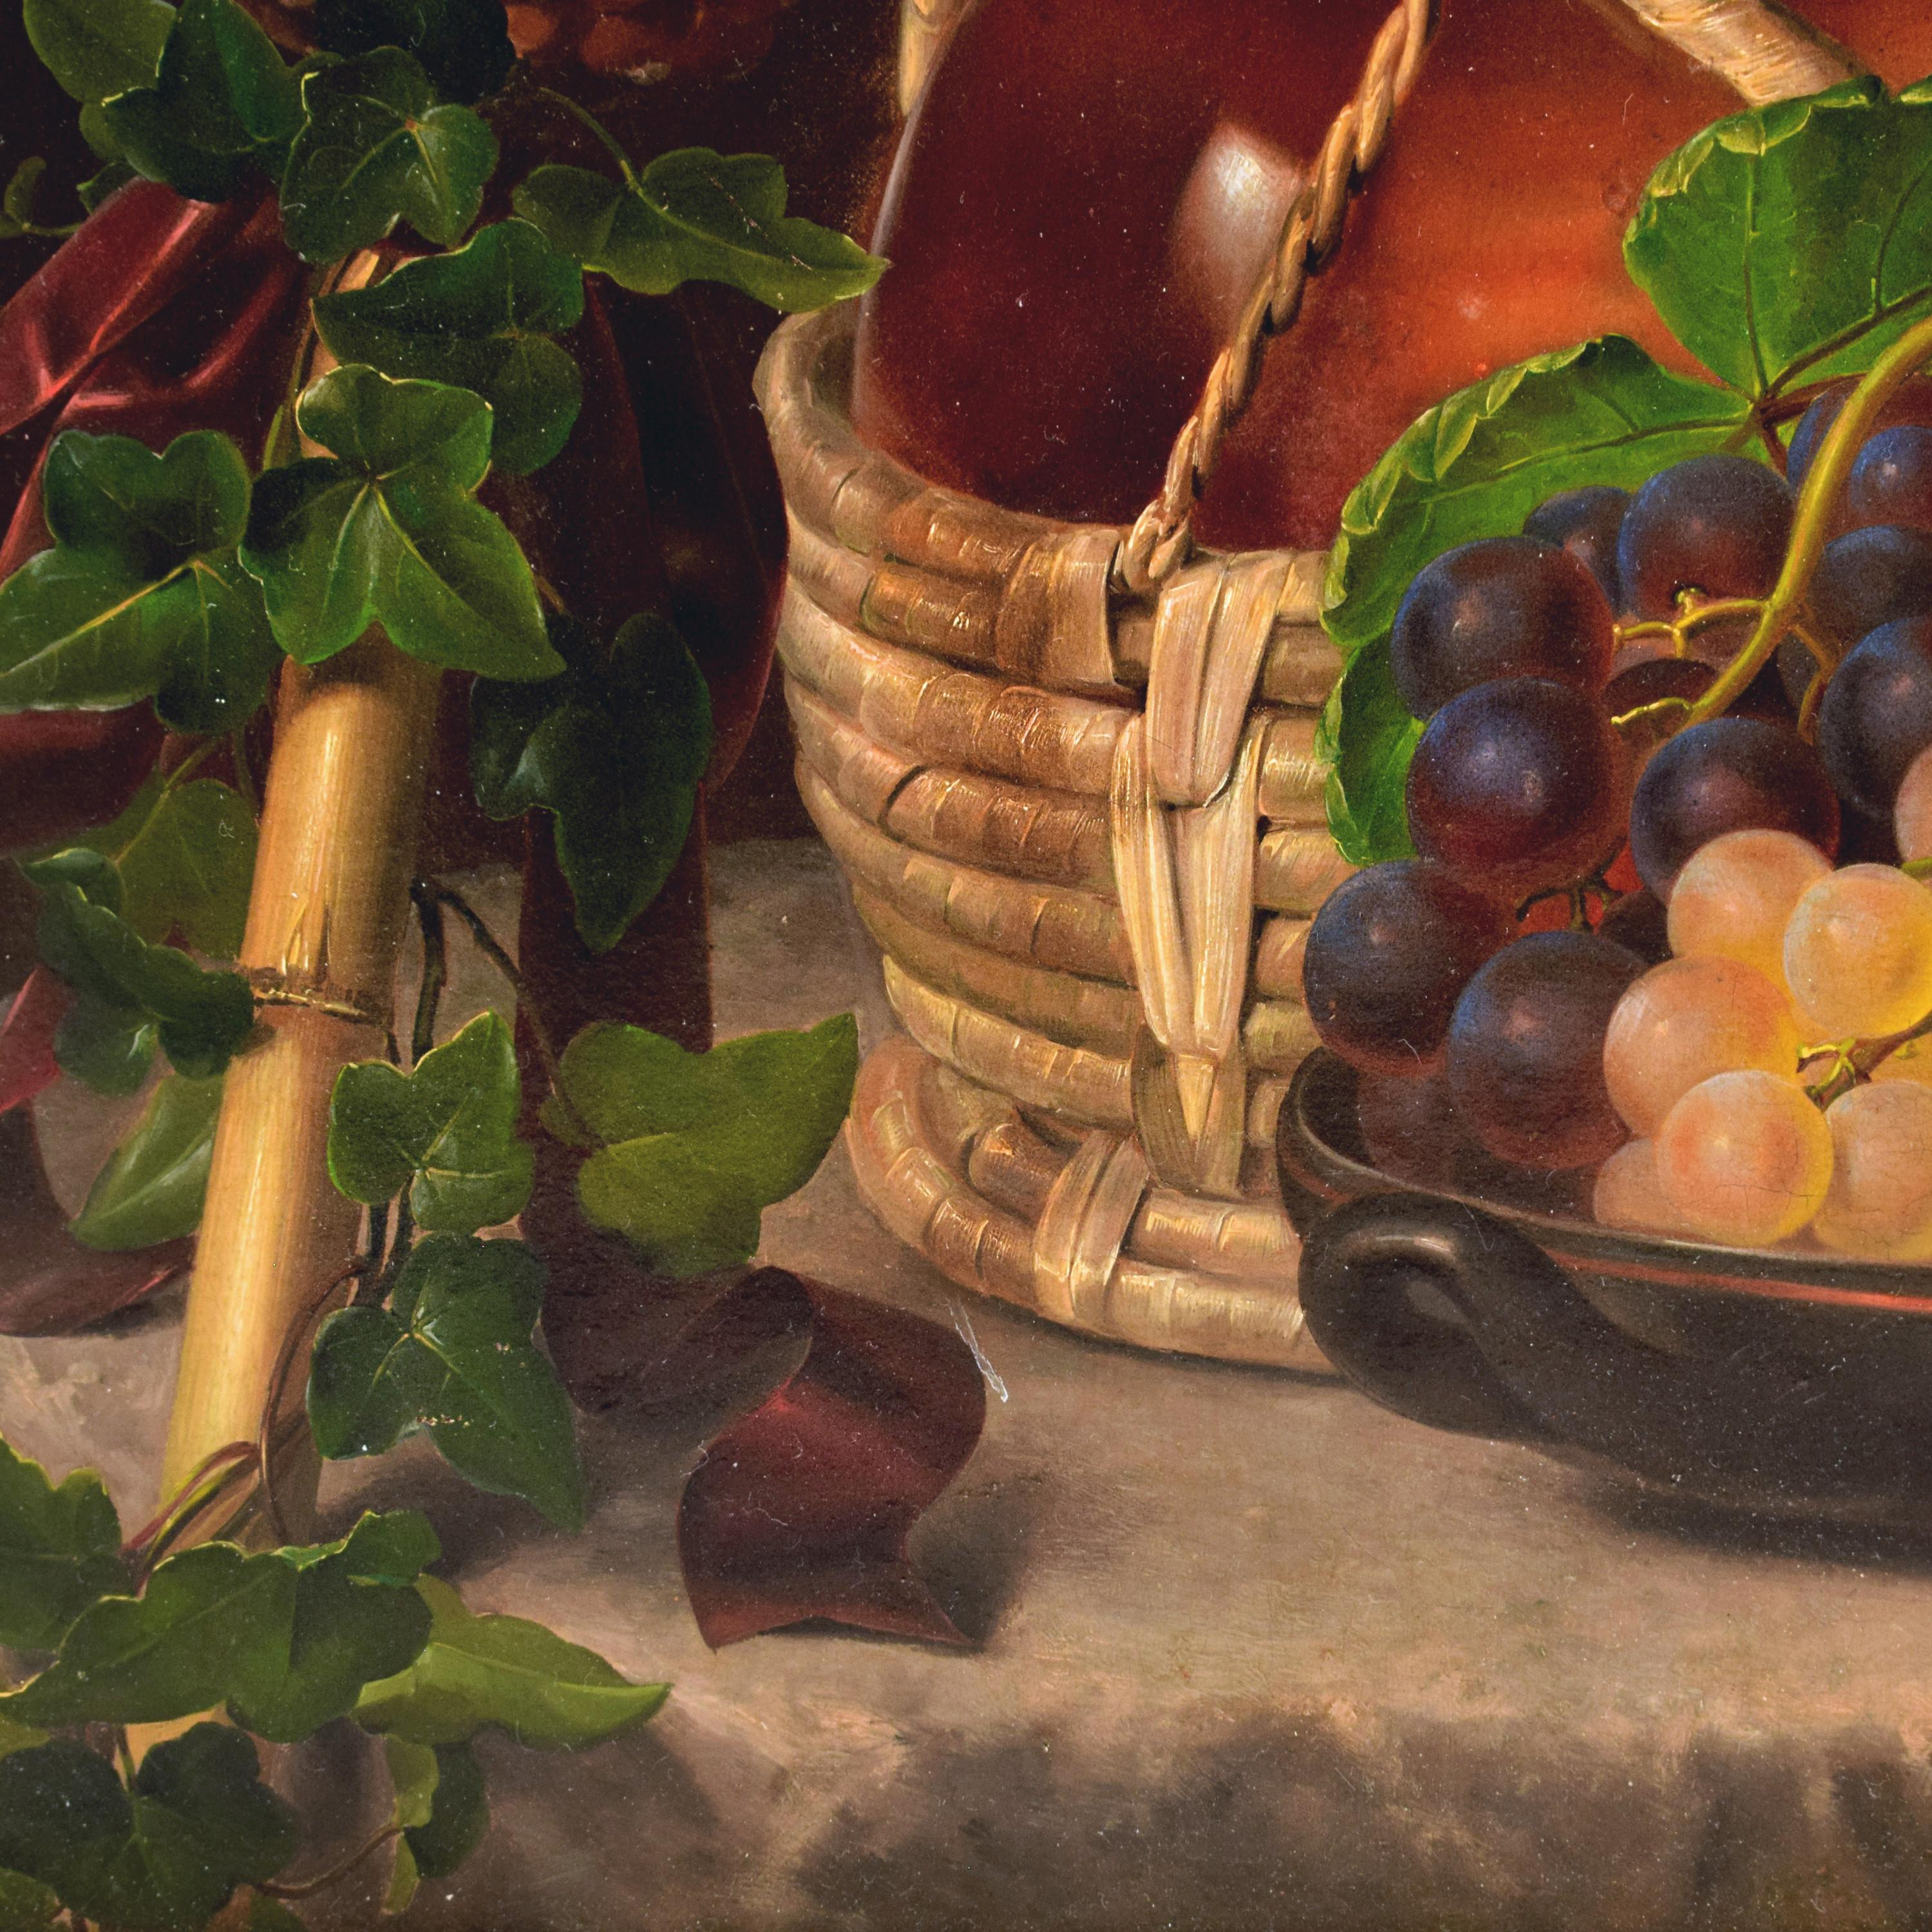 Painted I.L. Jensen, Painting Still Life with Grapes and Wine on a Table, Signed